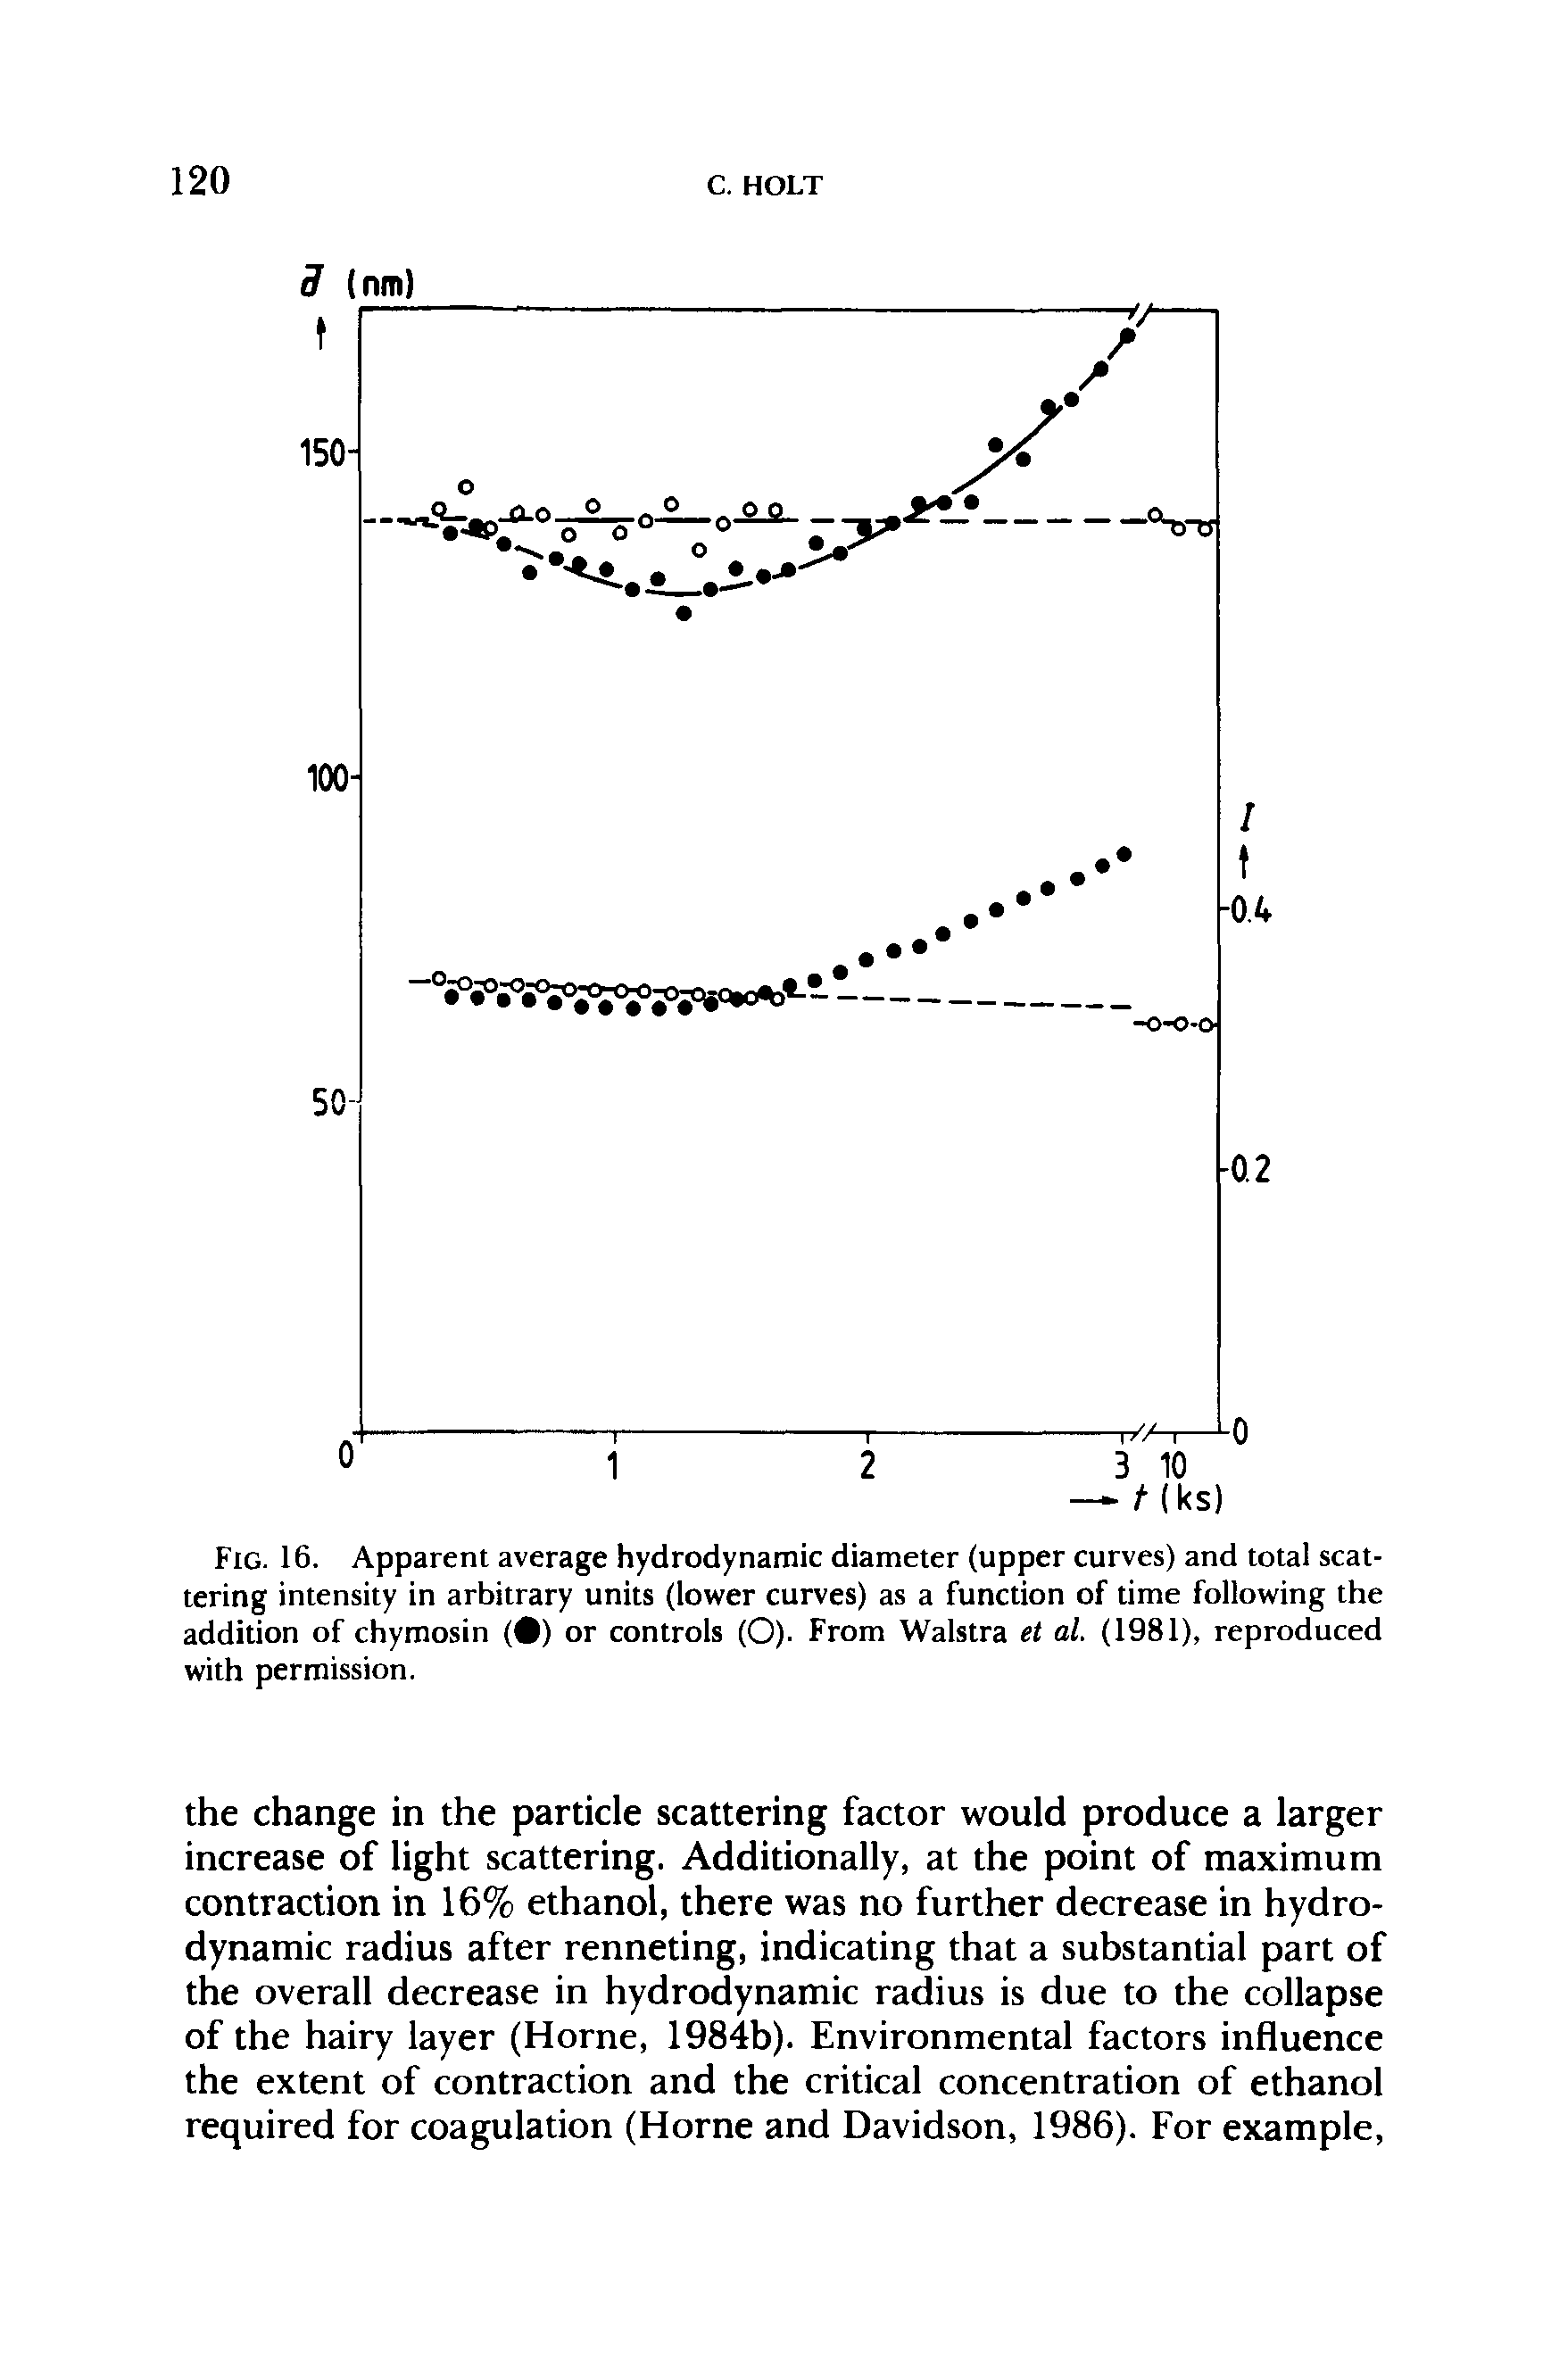 Fig. 16. Apparent average hydrodynamic diameter (upper curves) and total scattering intensity in arbitrary units (lower curves) as a function of time following the addition of chymosin ( ) or controls (O). From Walstra et al. (1981), reproduced with permission.